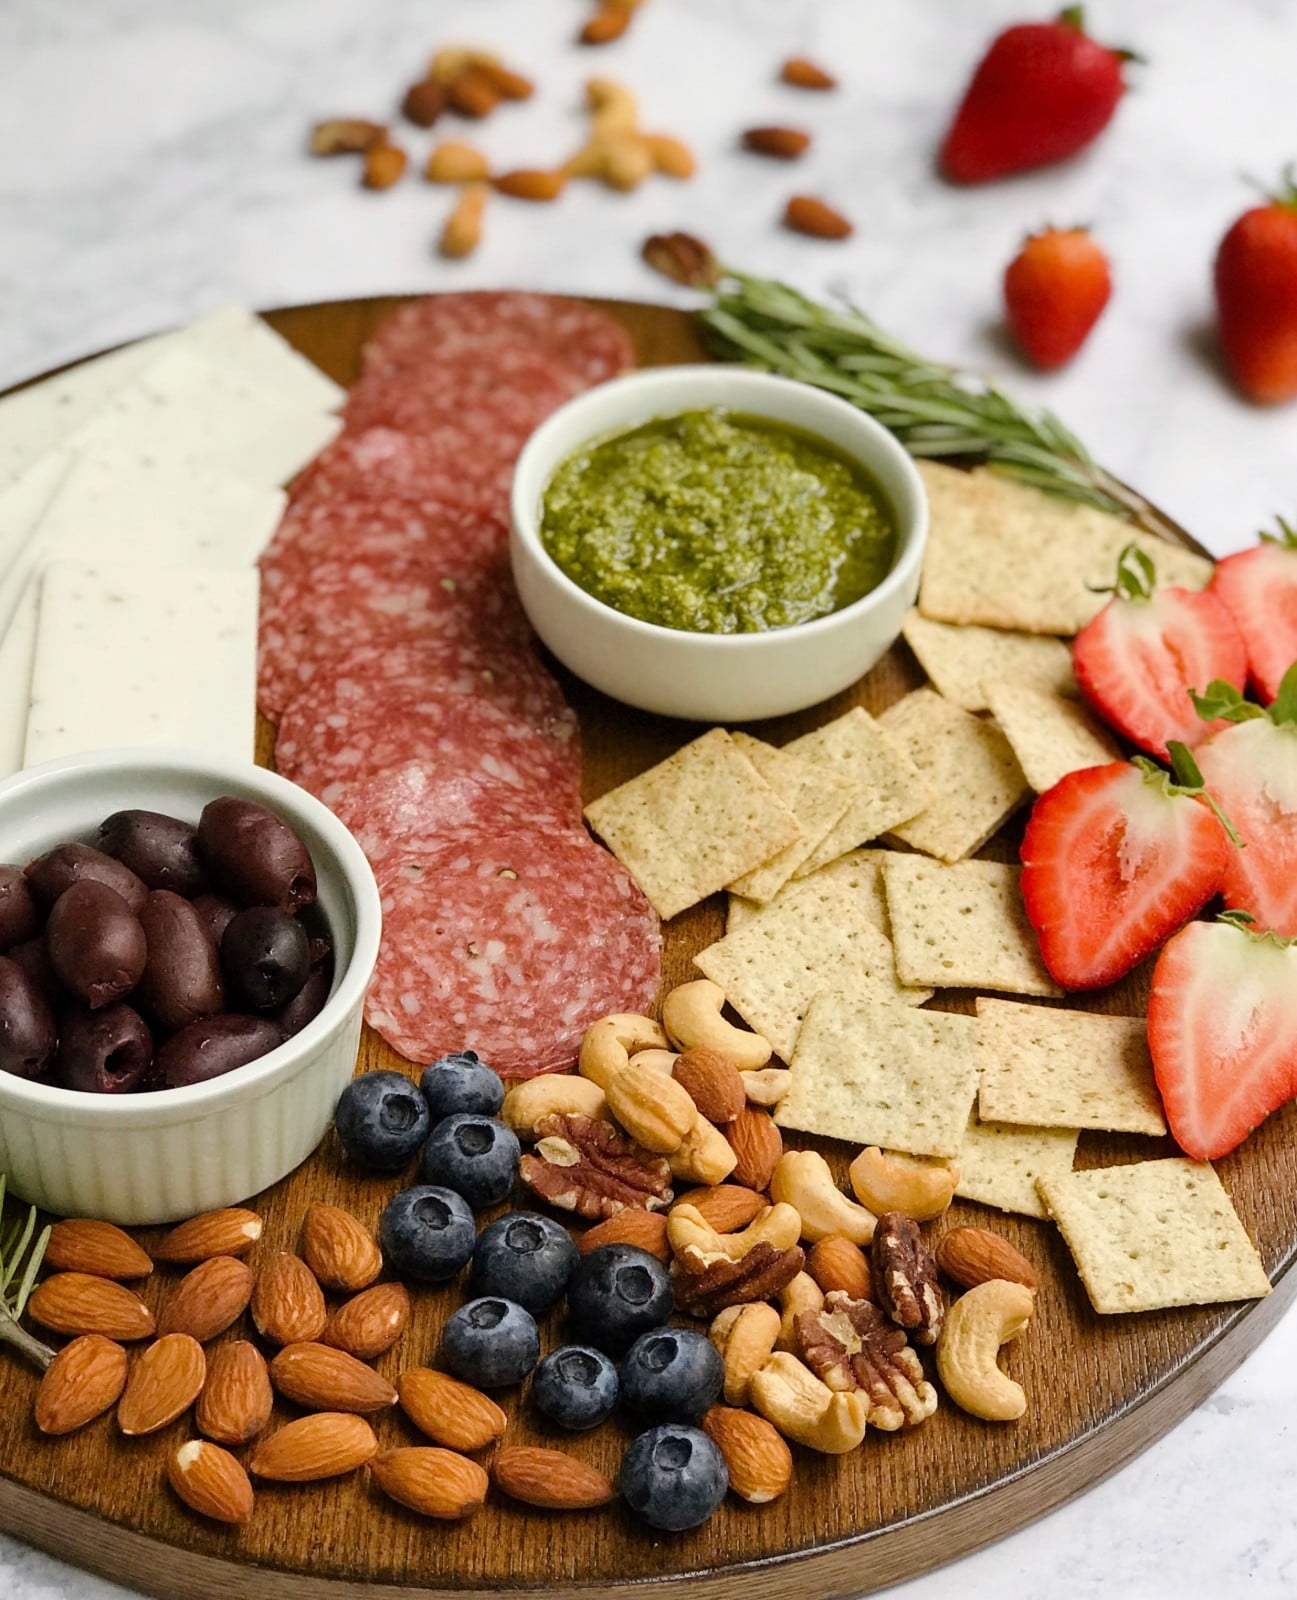 A gluten-free and dairy-free charcuterie board displaying meat, cheese, nuts, fruit, fresh herbs, crackers, olives, and pickles.